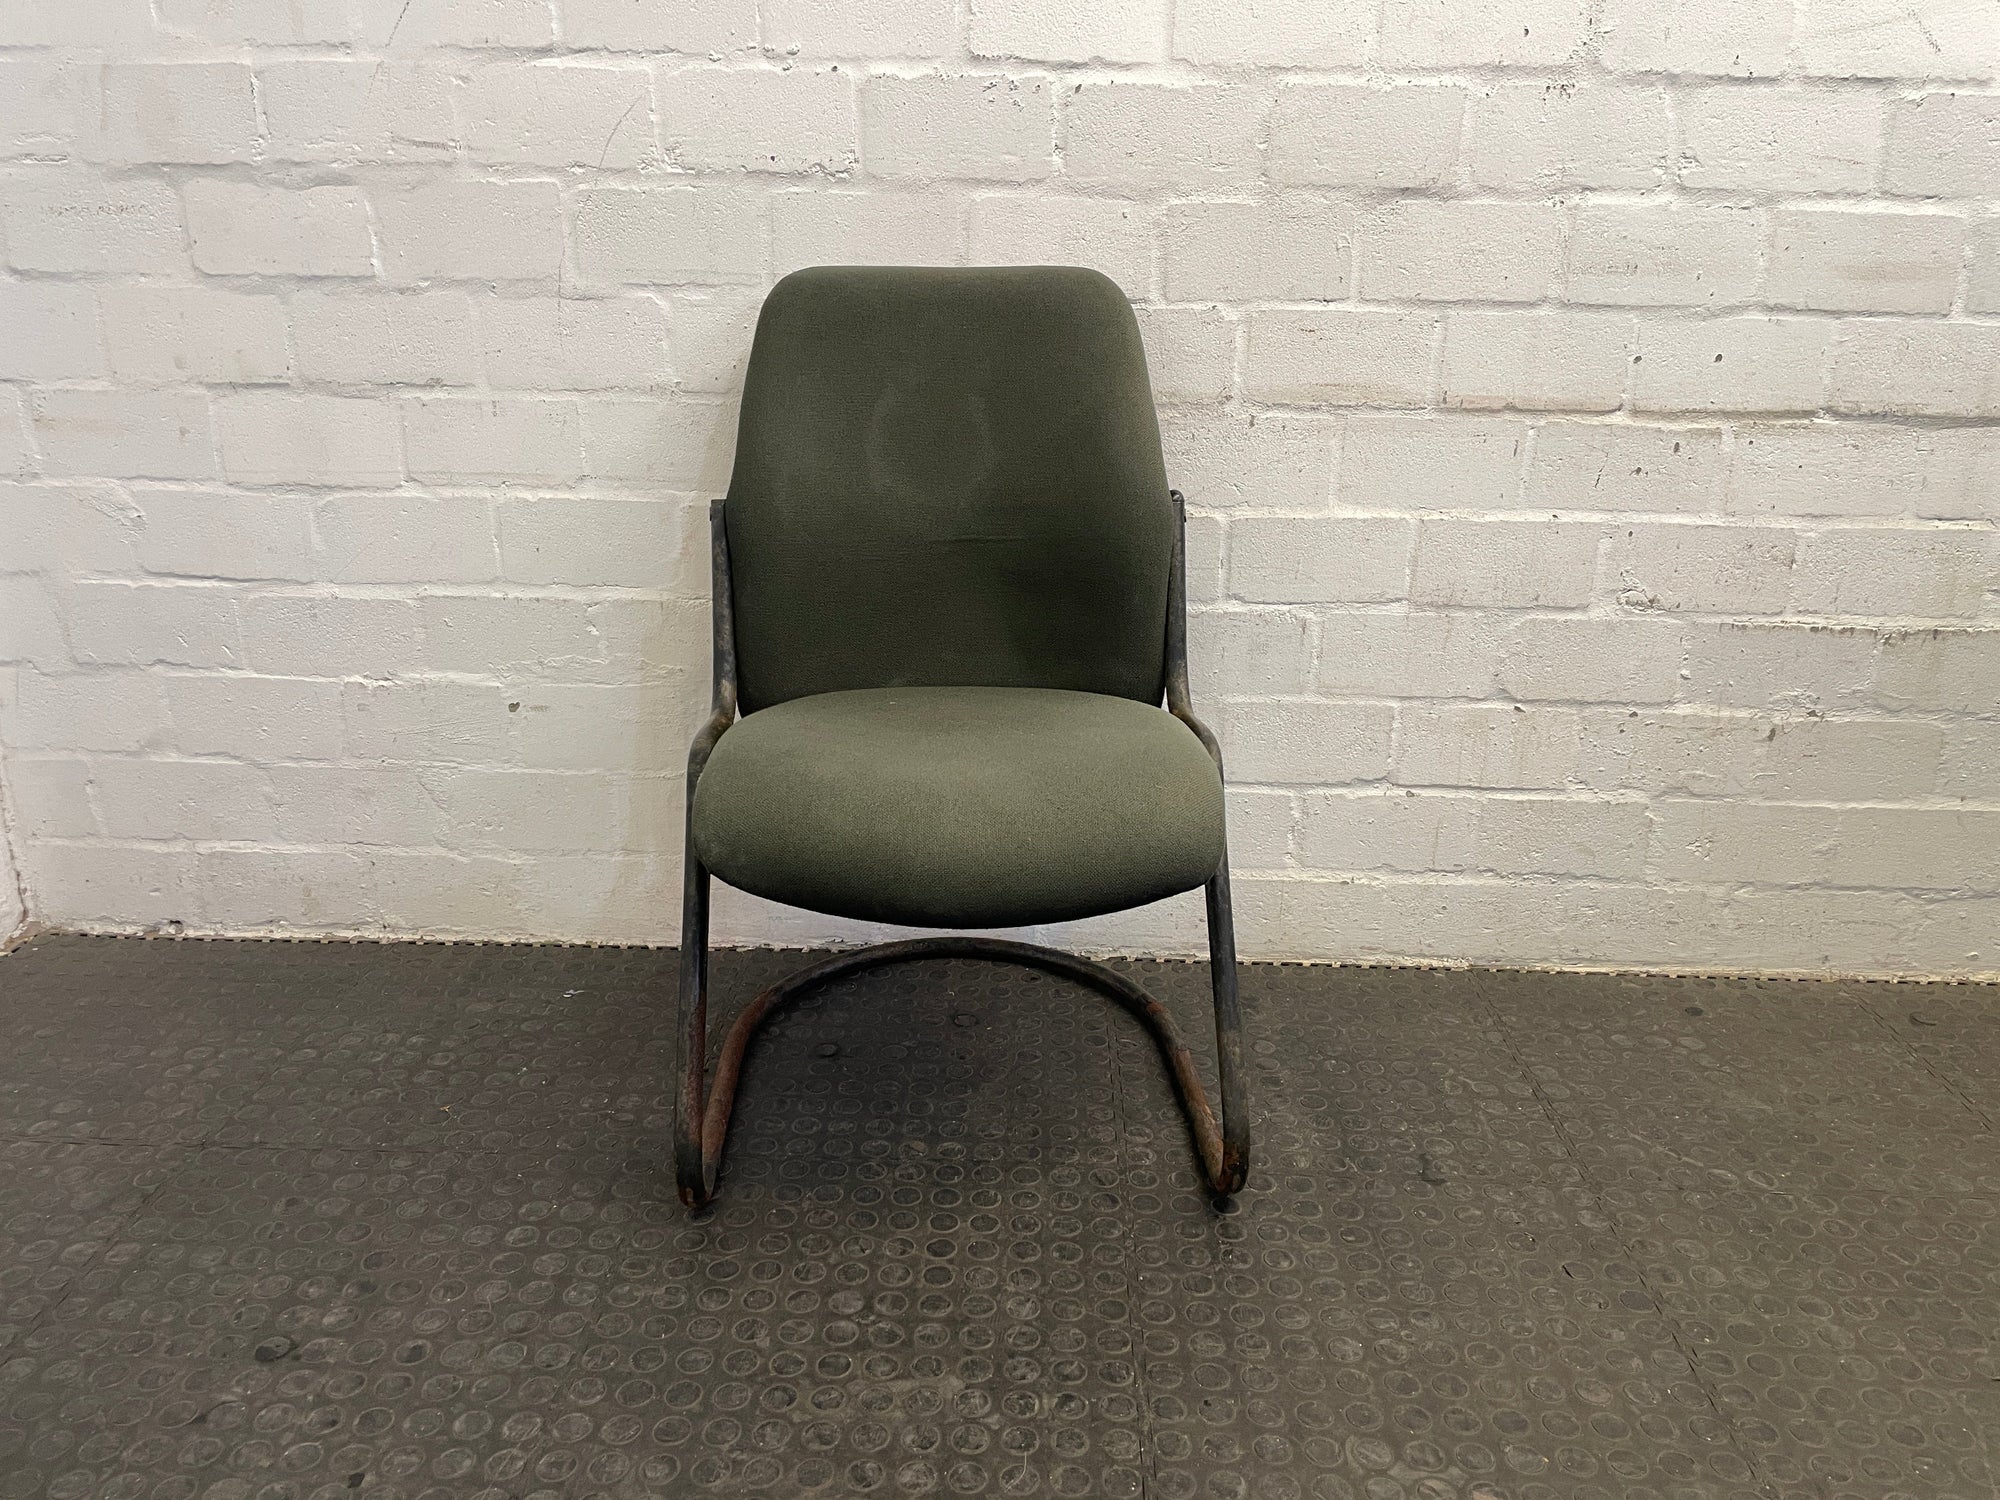 Black Office Visitors Chair (Faded/Rusted)